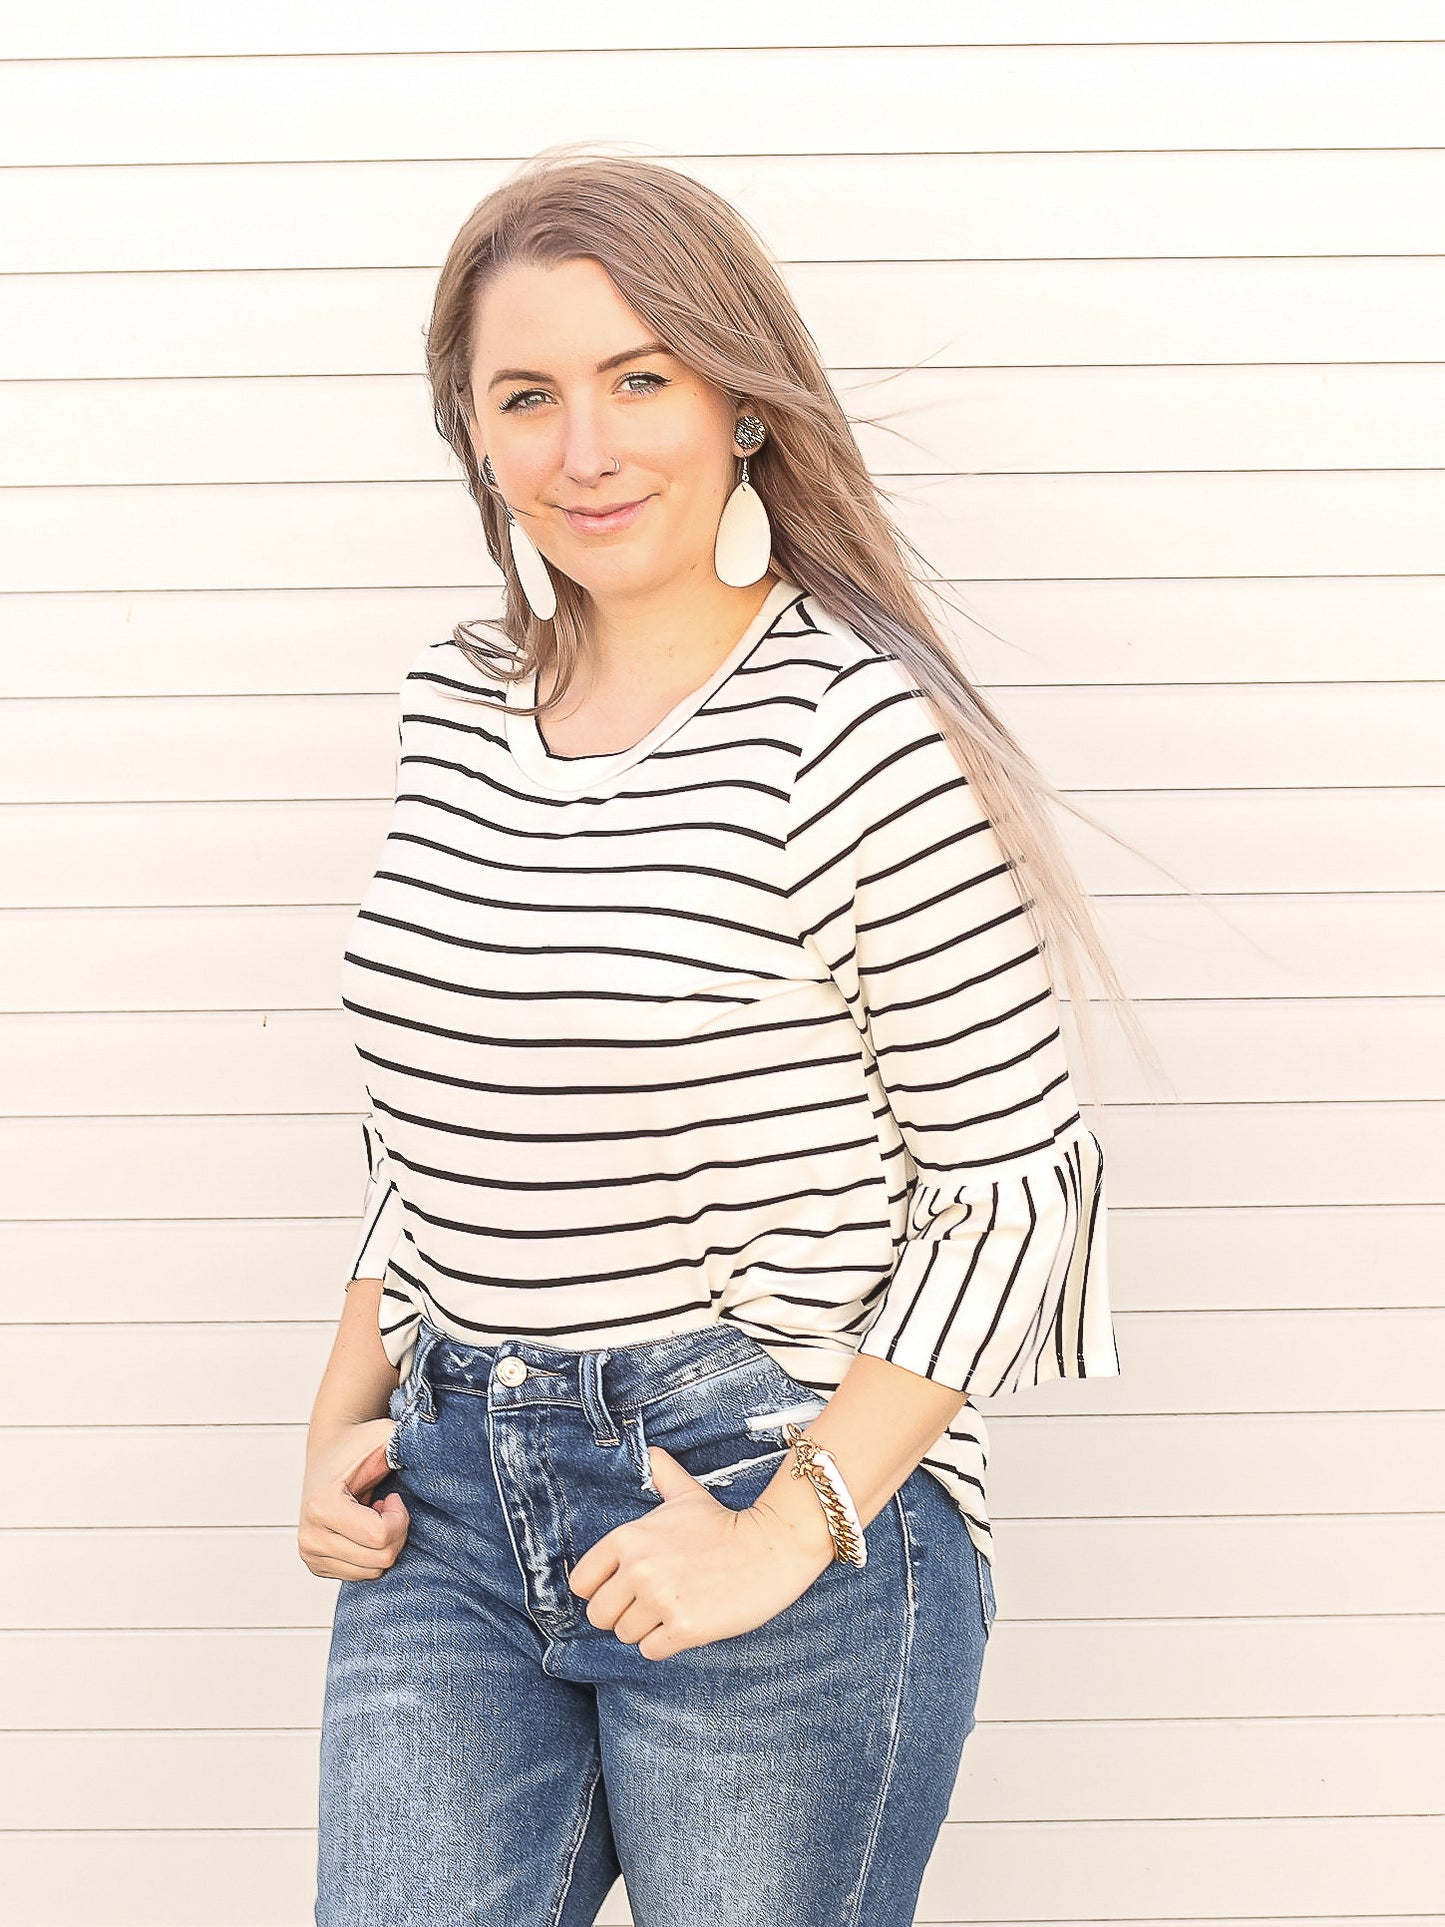 Simple white and black striped 3/4 sleeve top tucked into denim